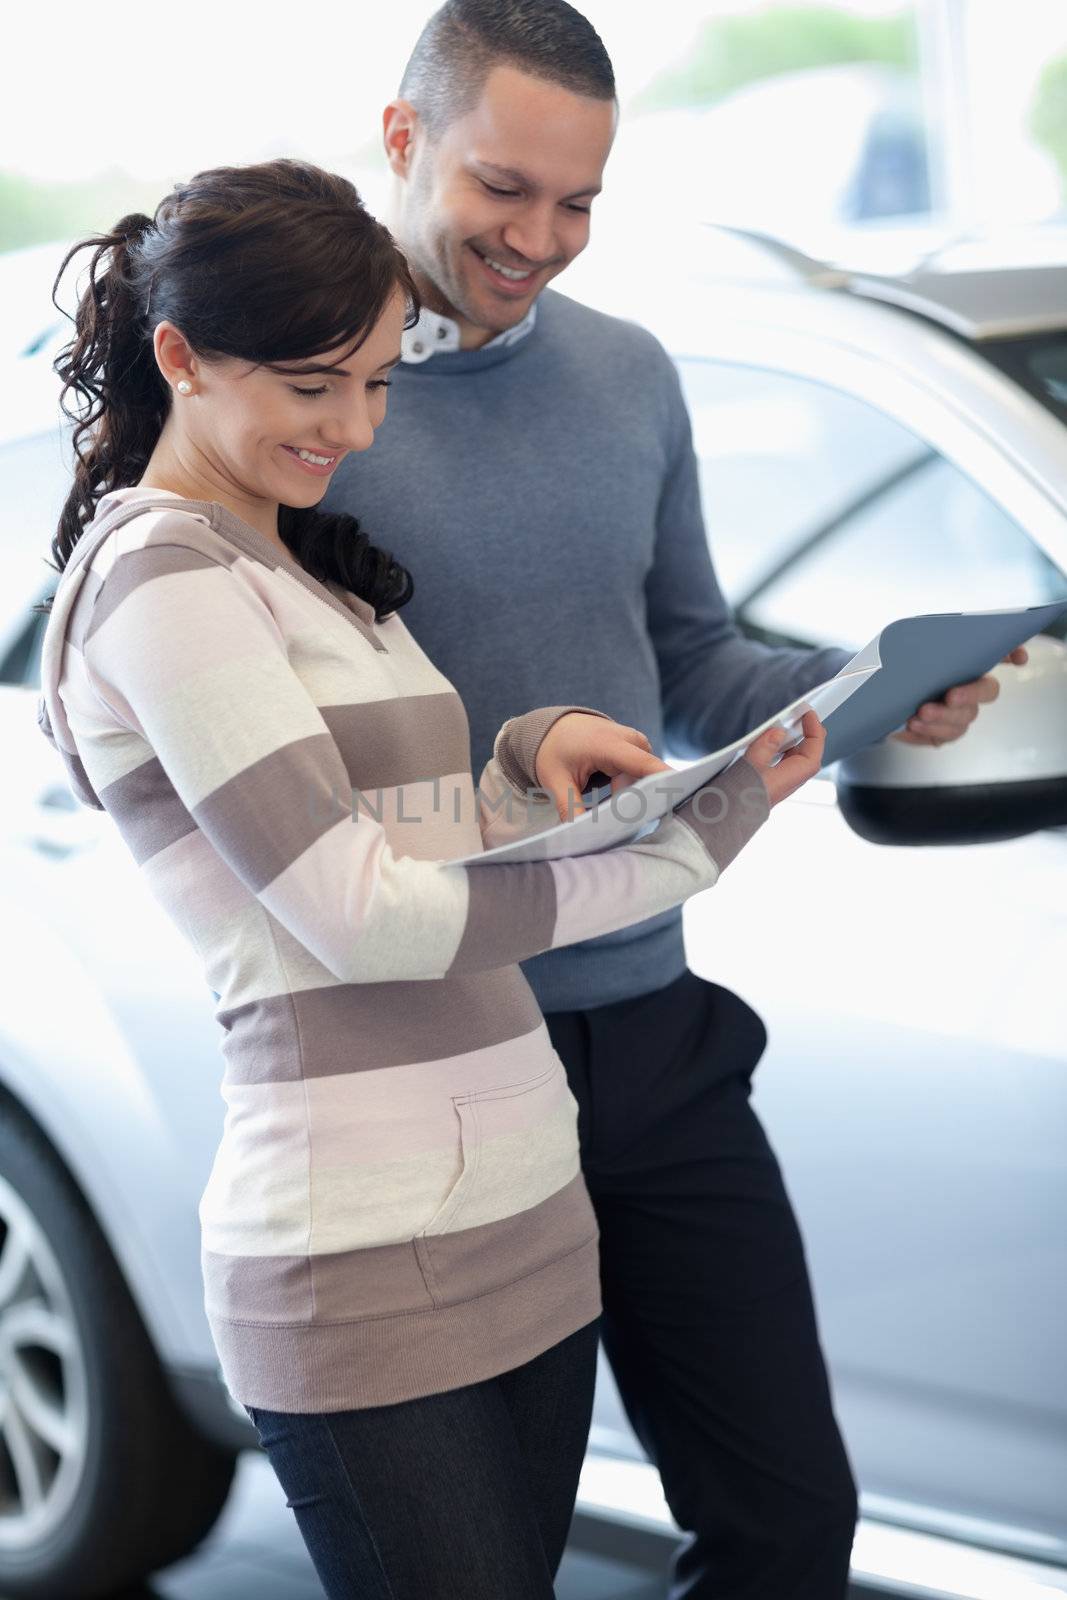 Couple holding documents in a carshop